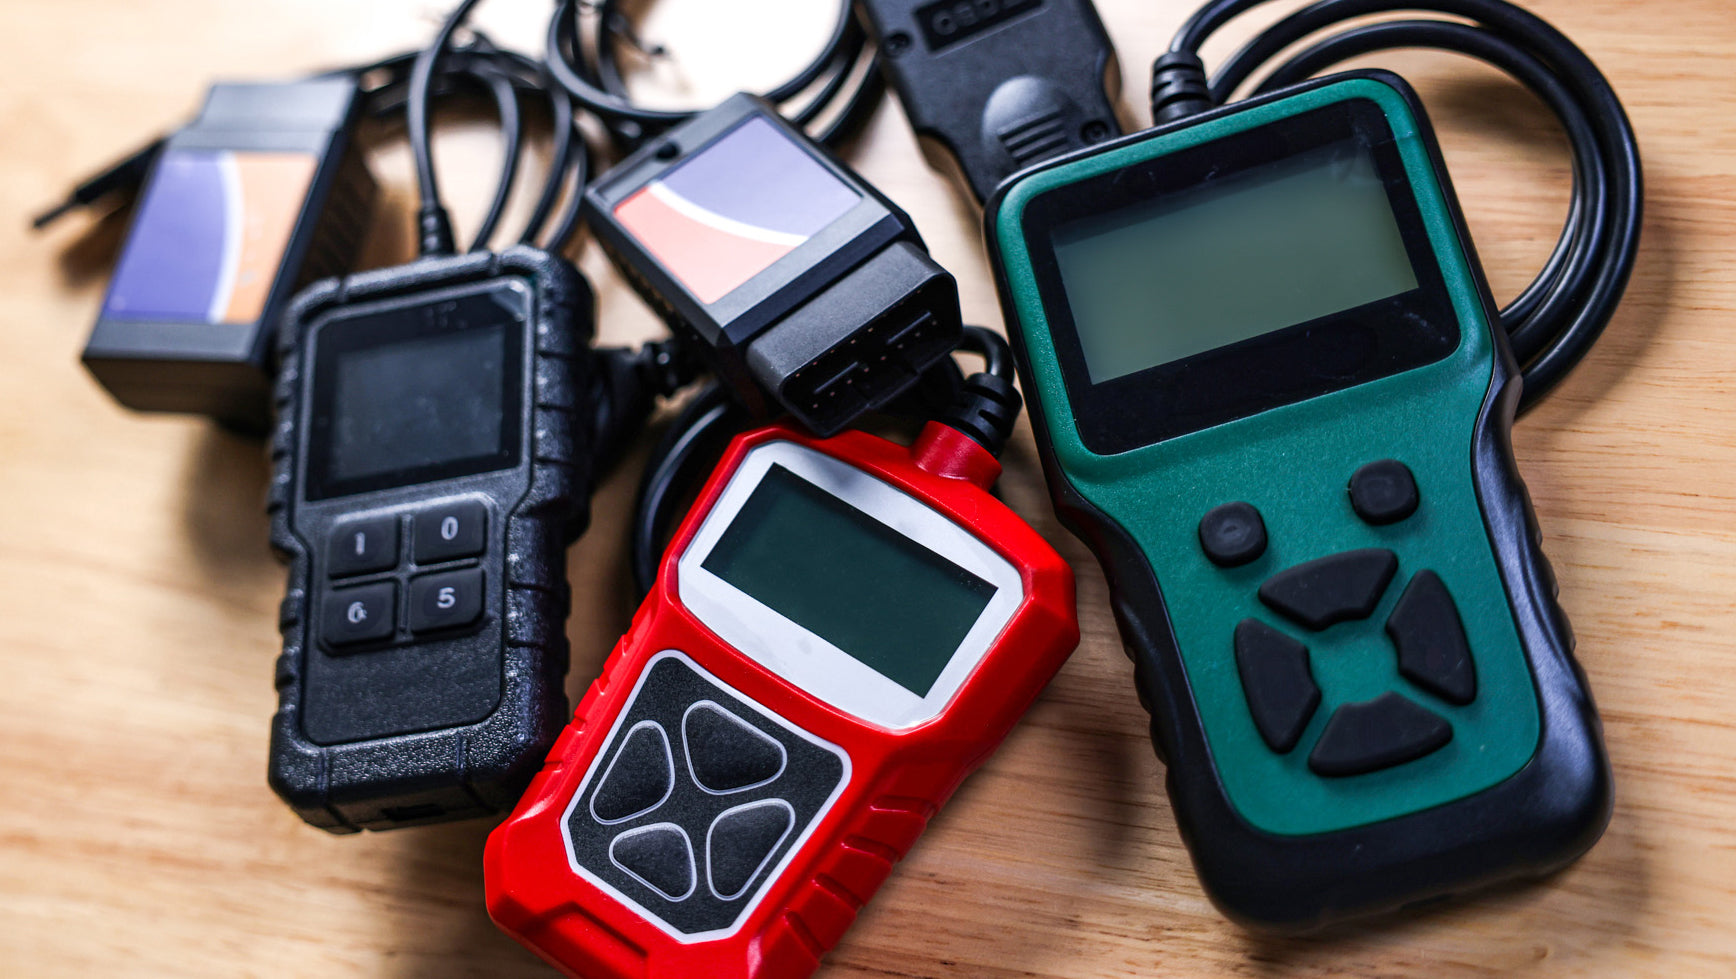 Bought A Non-American OBD2 Scanner? You May Want To Reconsider